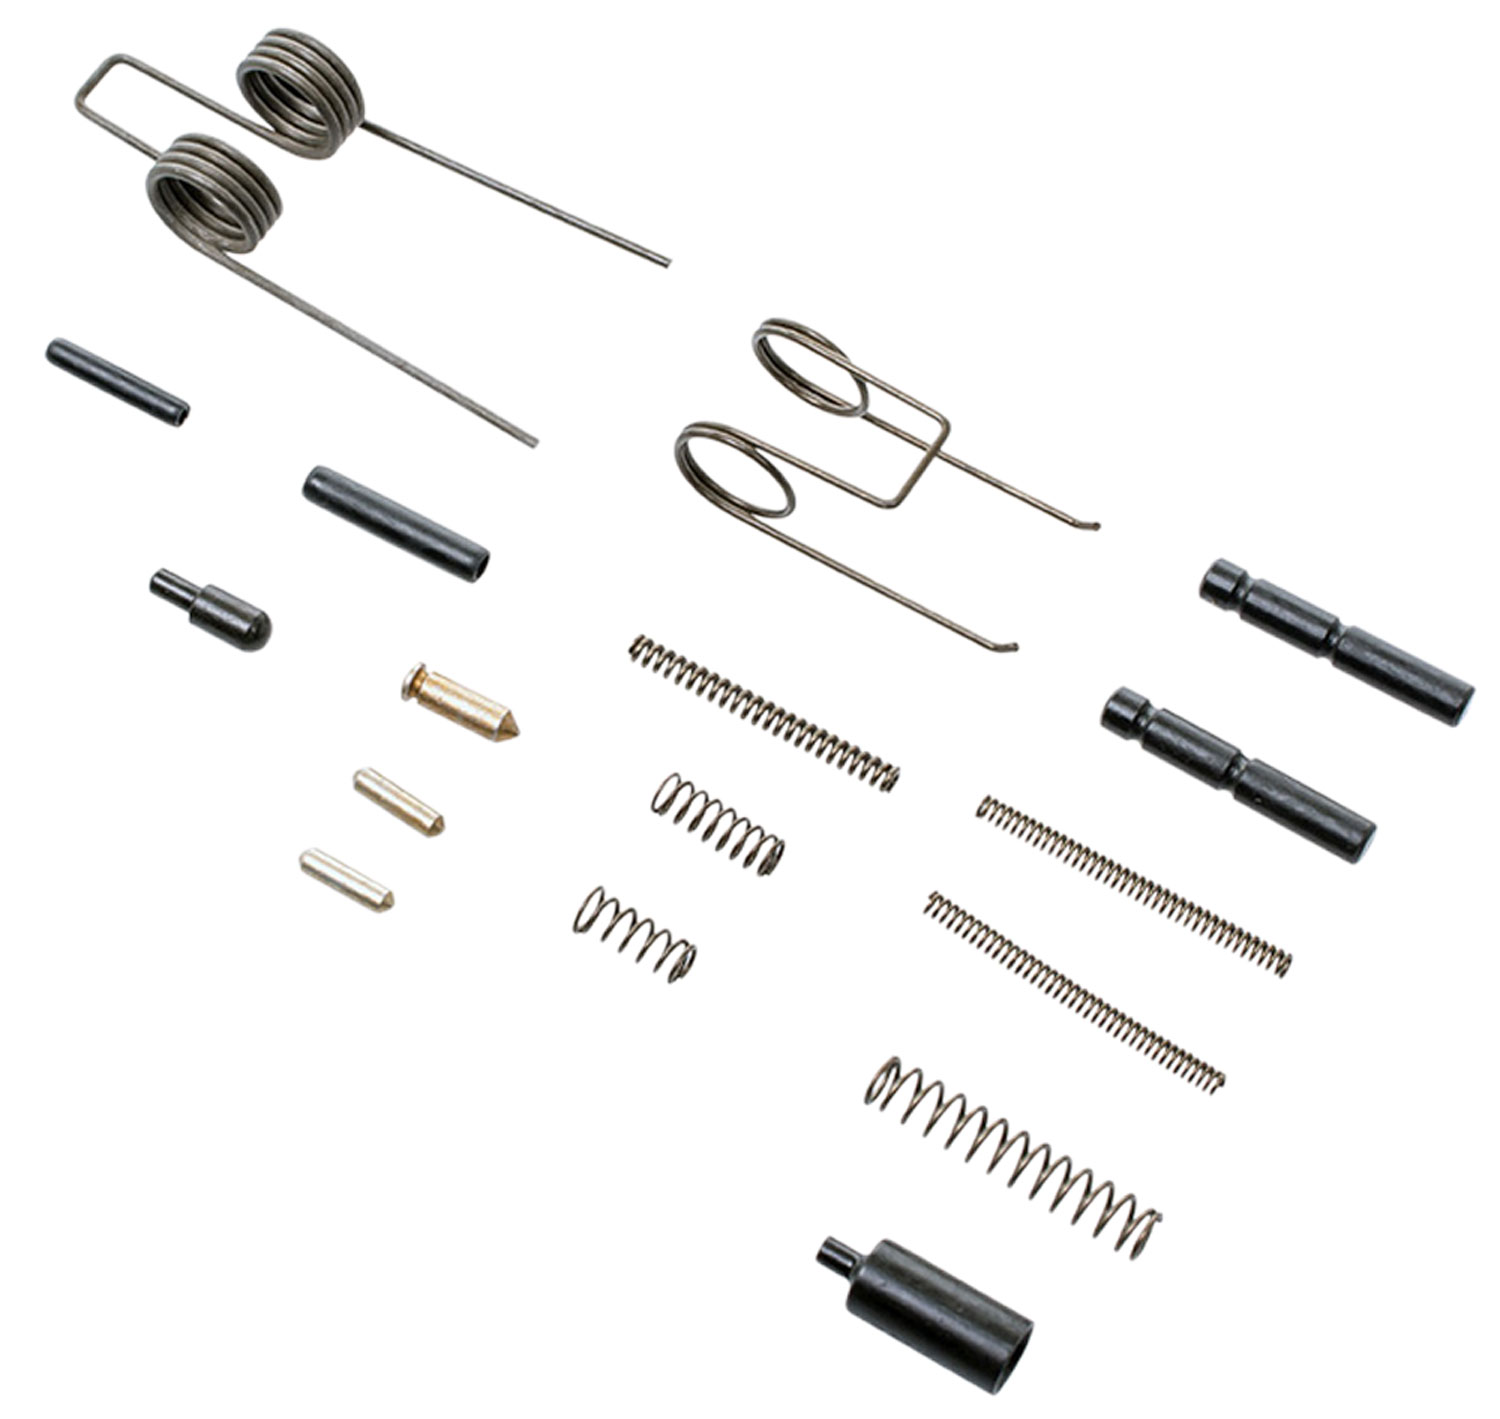 CMMG PARTS KIT FOR AR-15 LOWER PINS AND SPRINGS